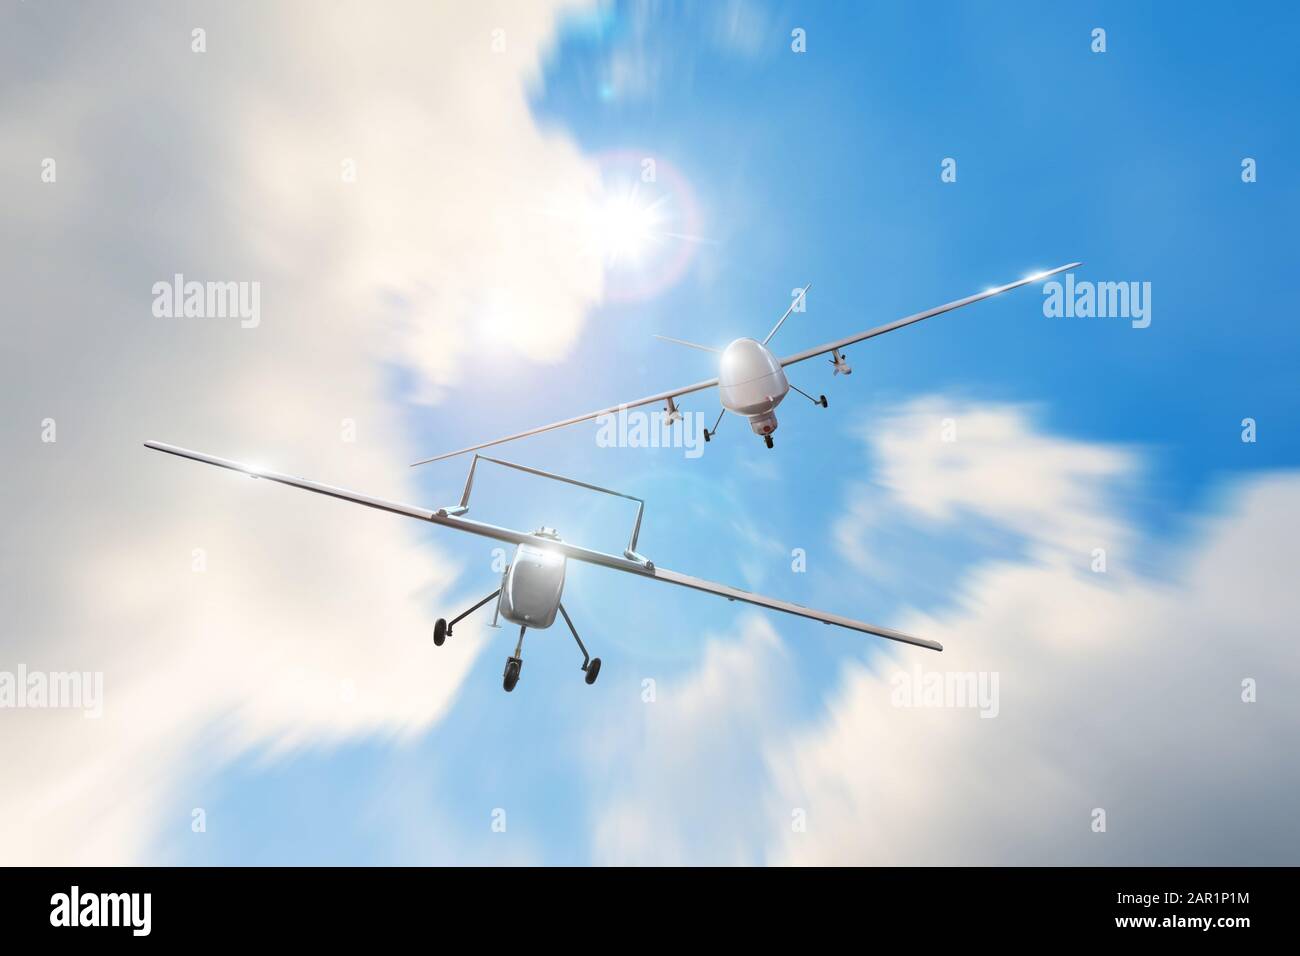 Chasing speed motion a military drone to others, aerial combat Stock Photo